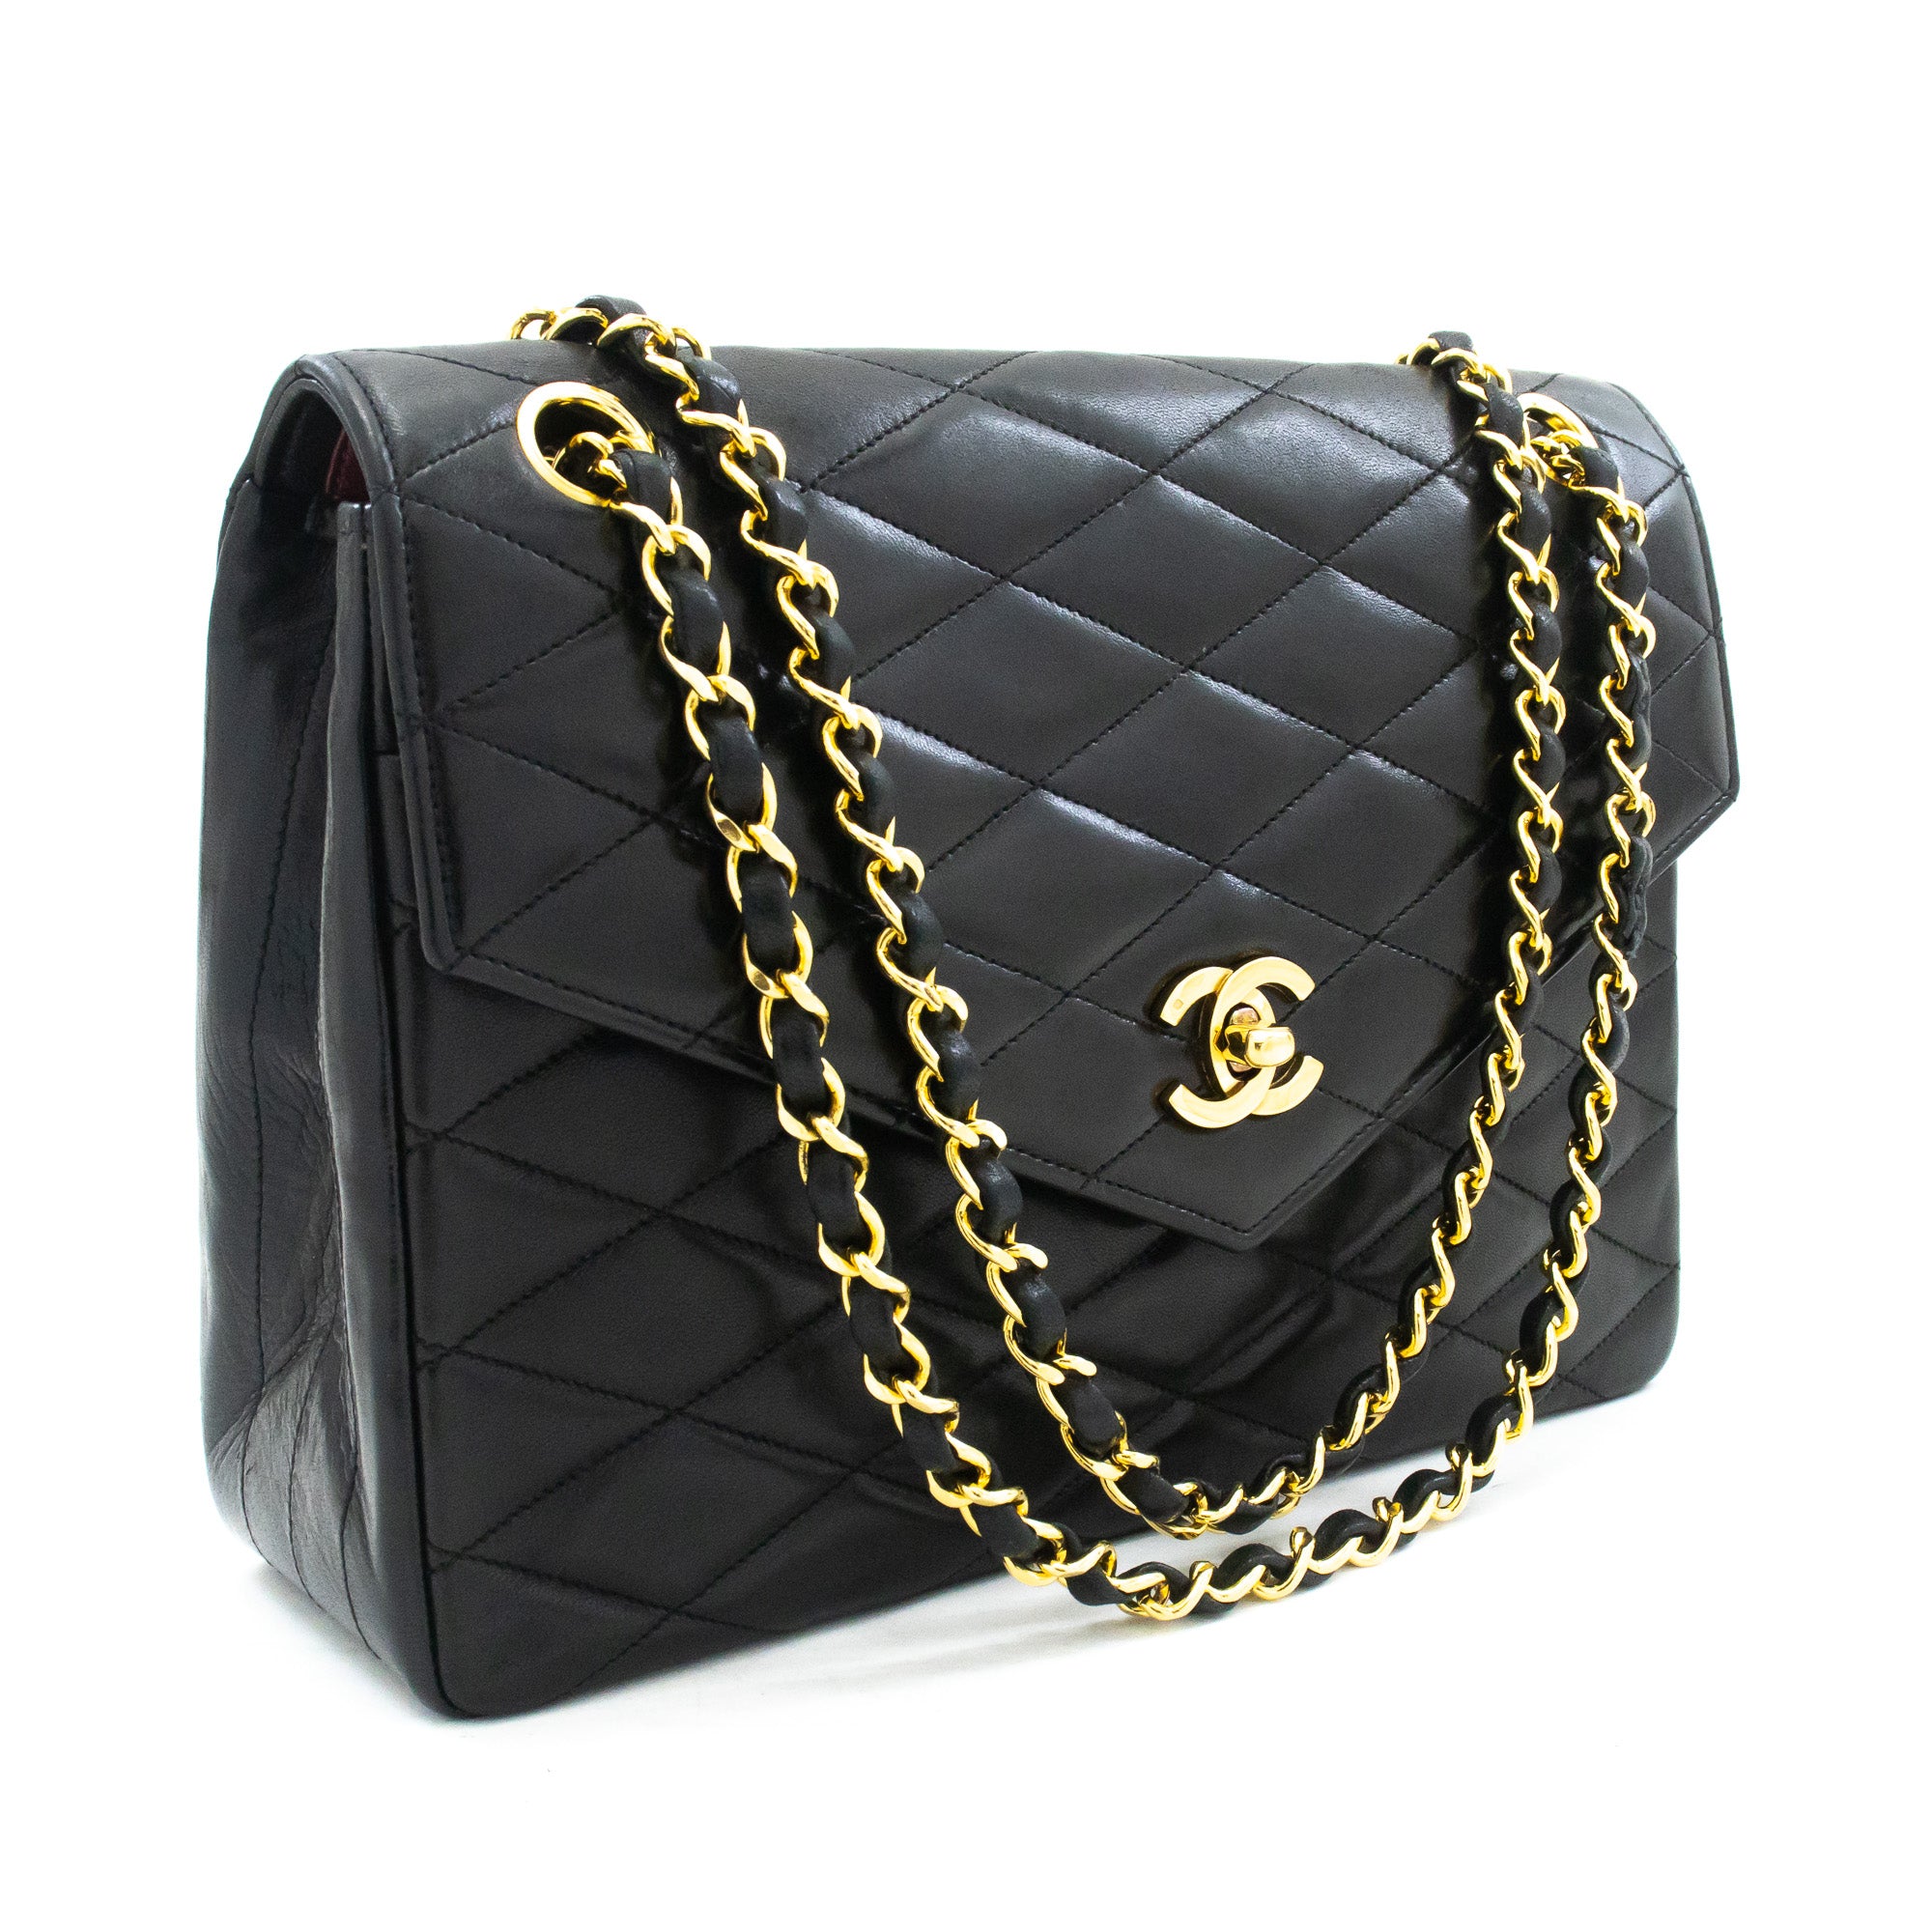 Duma leather backpack Chanel Black in Leather - 28175358